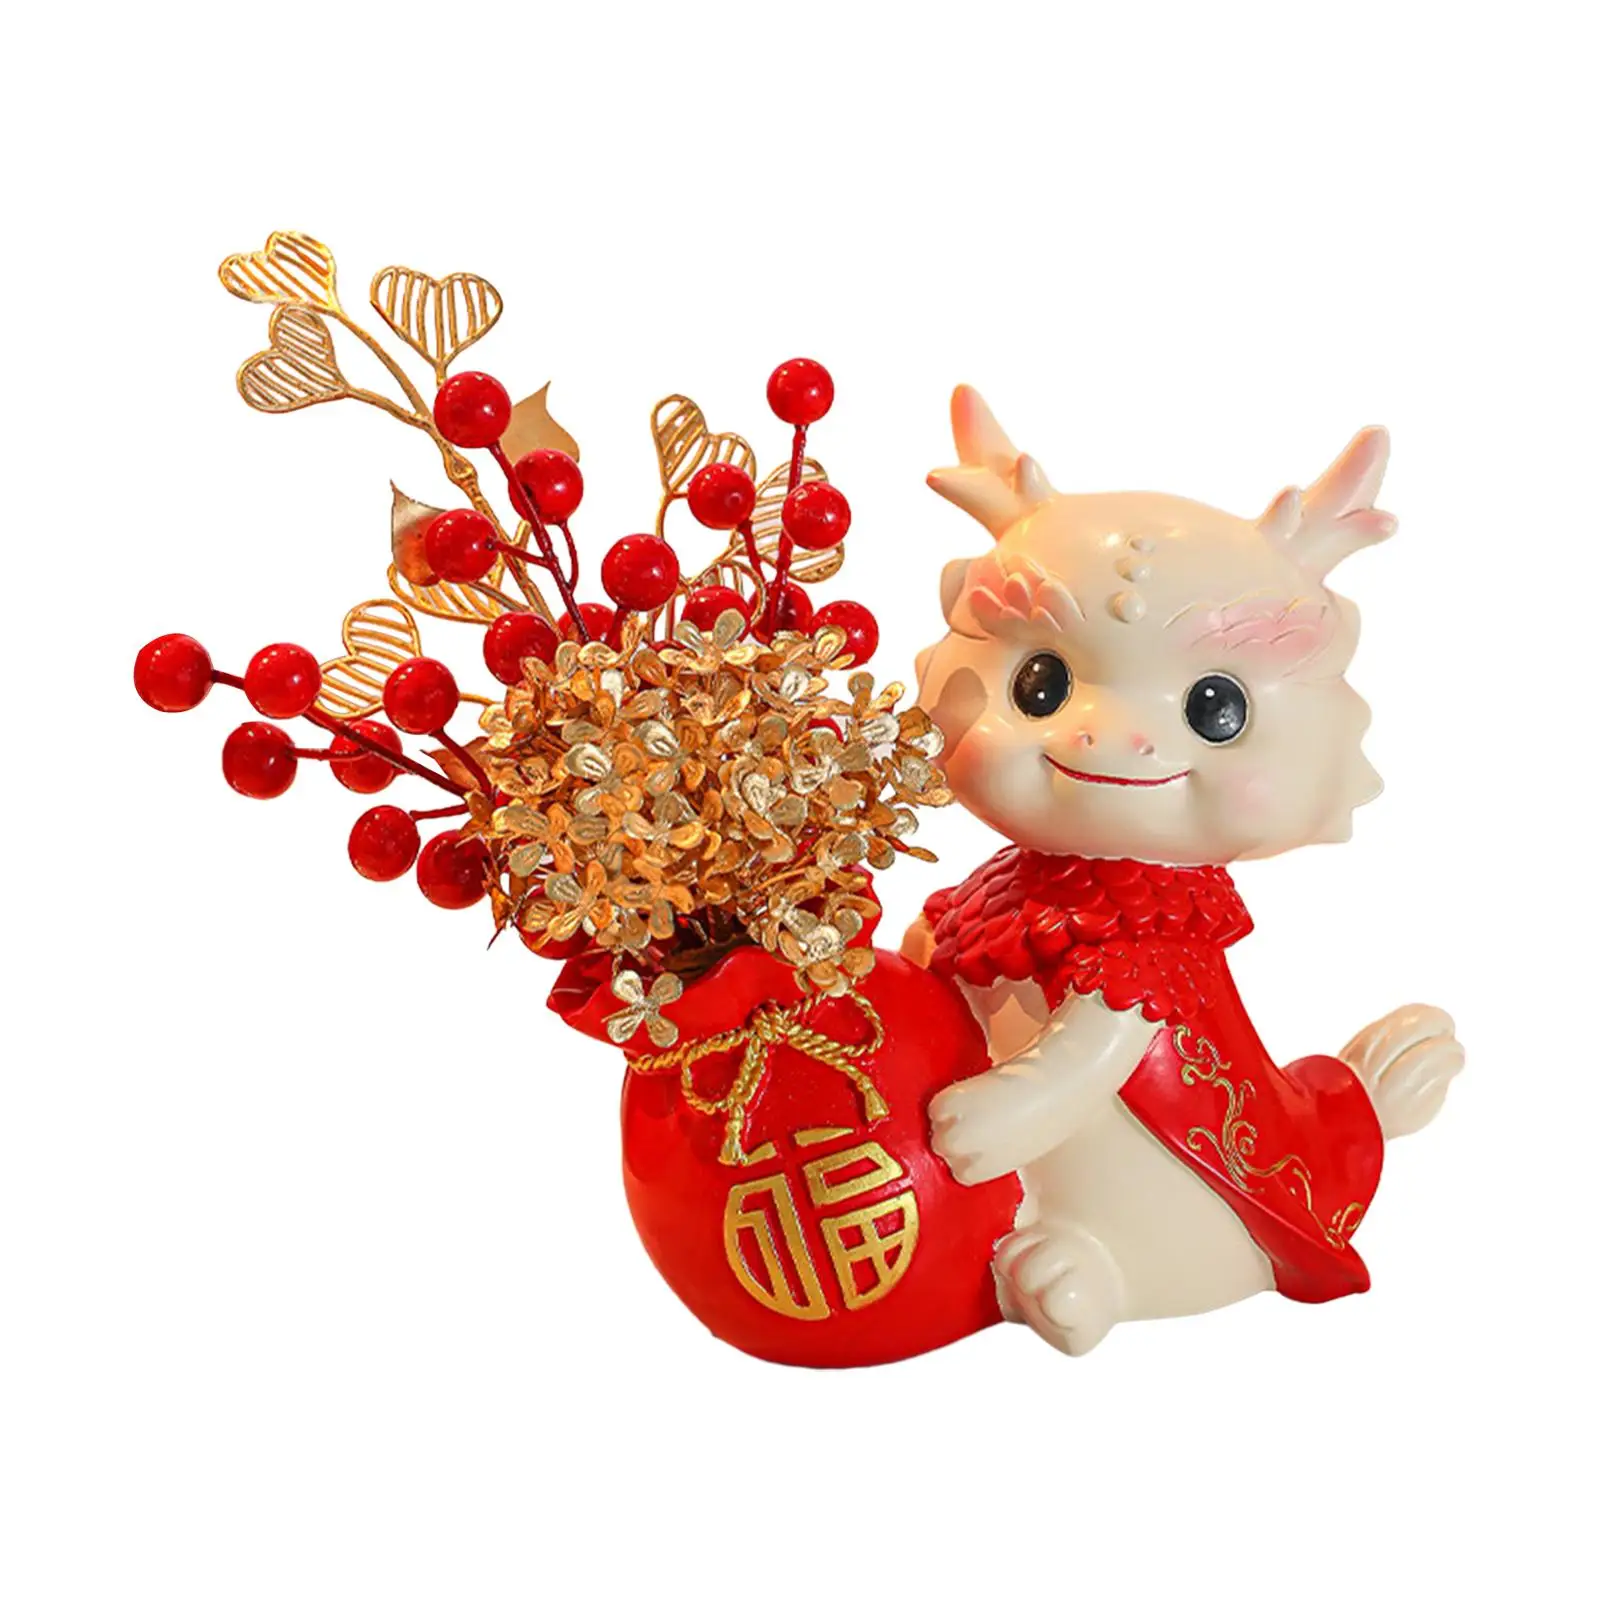 

Chinese New Year Dragon Figurine Ornament Adorable Handmade 7.8x3x11inch Resin Statue Table Decoration for Housewarming Gift